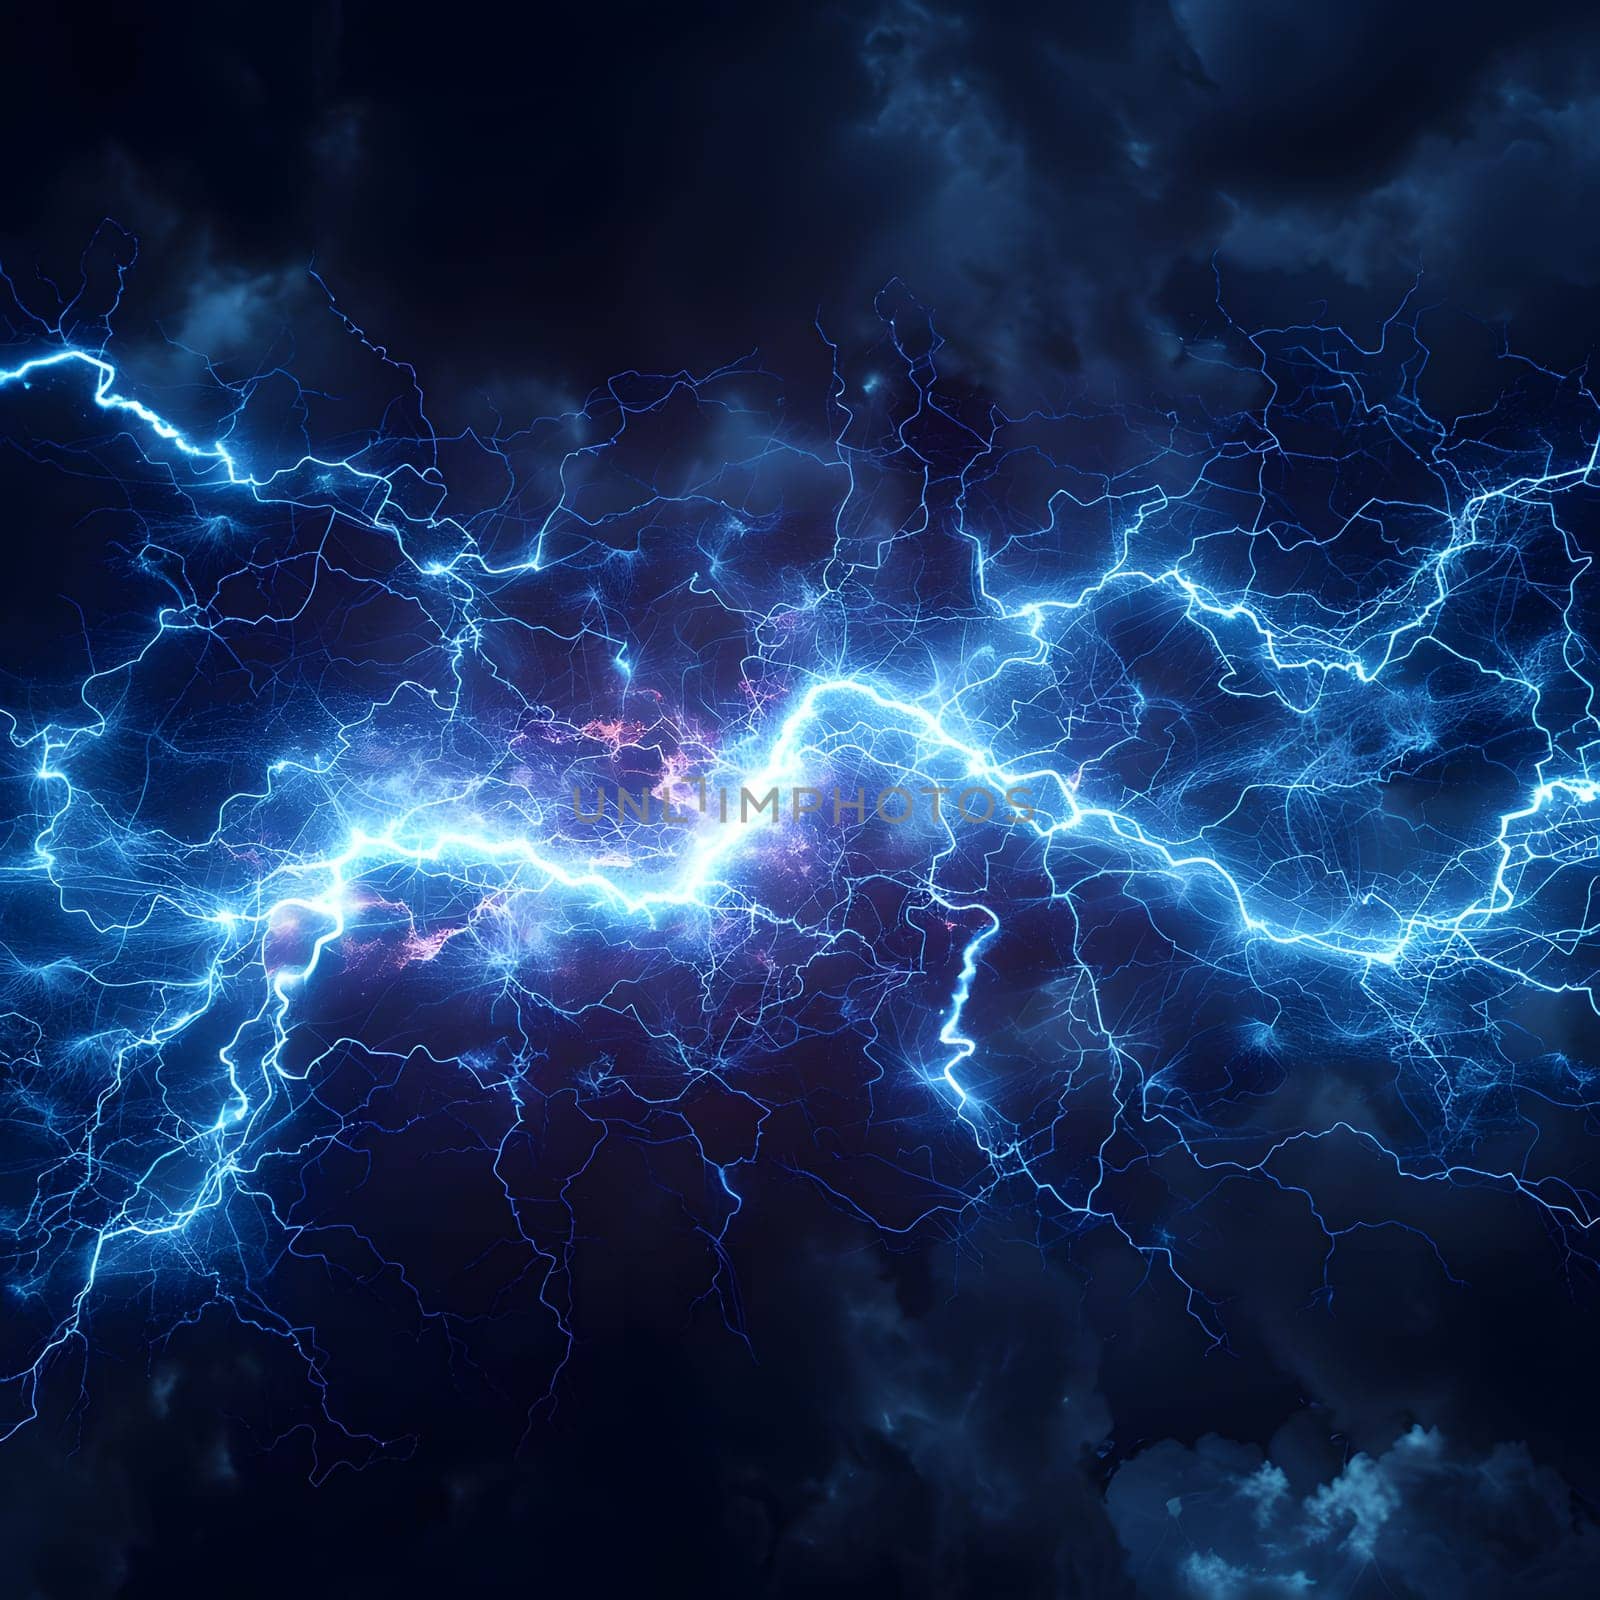 An electric blue lightning bolt dances across the dark cloudy sky, illuminating the purple hues of the atmosphere. The power of water and wind combine to create a breathtaking natural art display